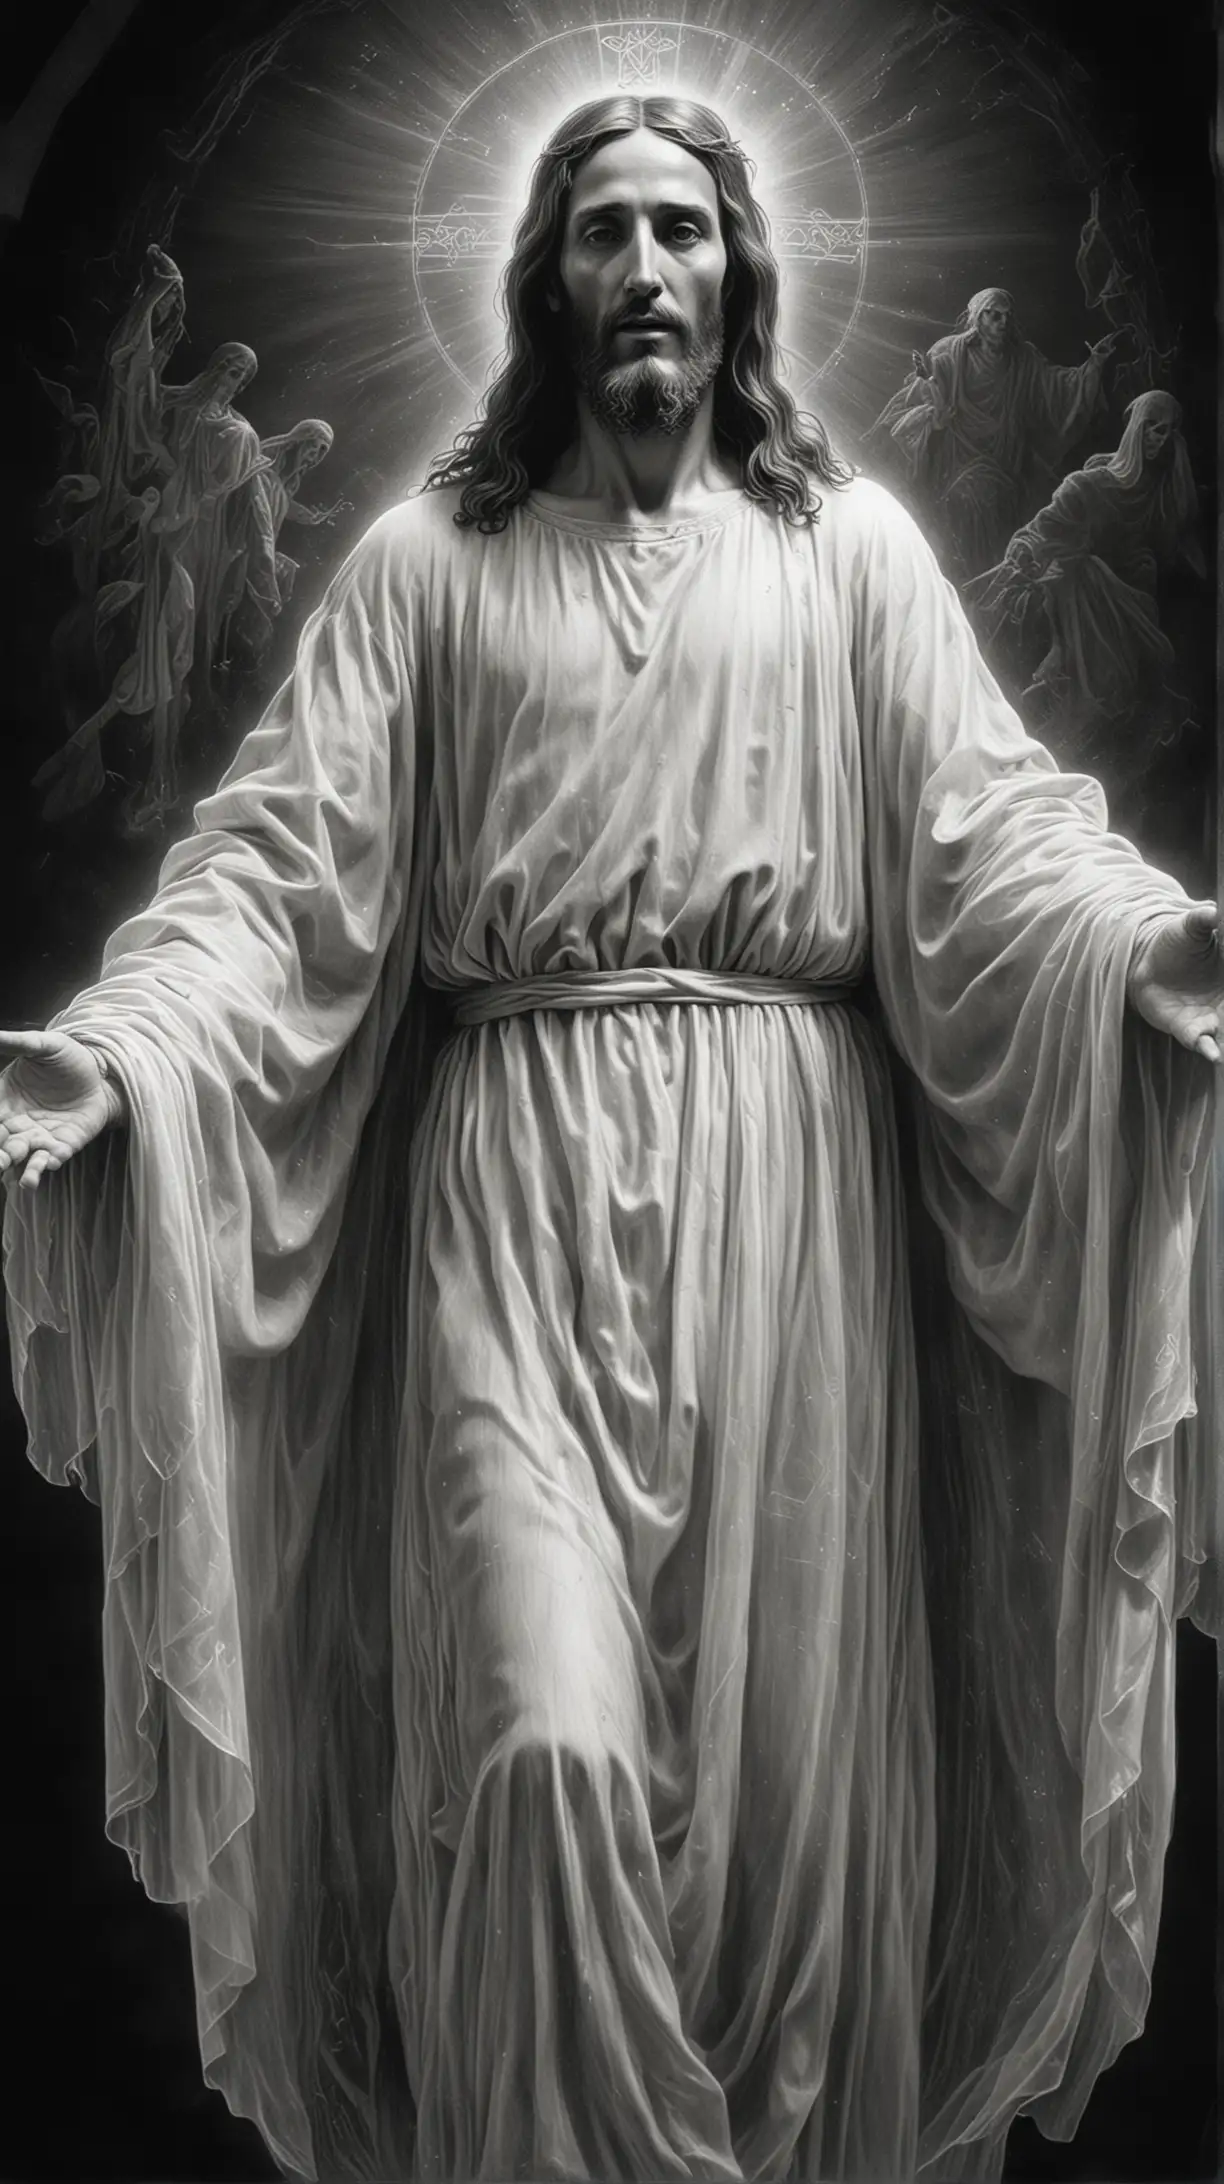  the luminous transparent ghost of a Jesus Christ, in the style of an illustration by ghost, black and white engraving, hyperdetailed